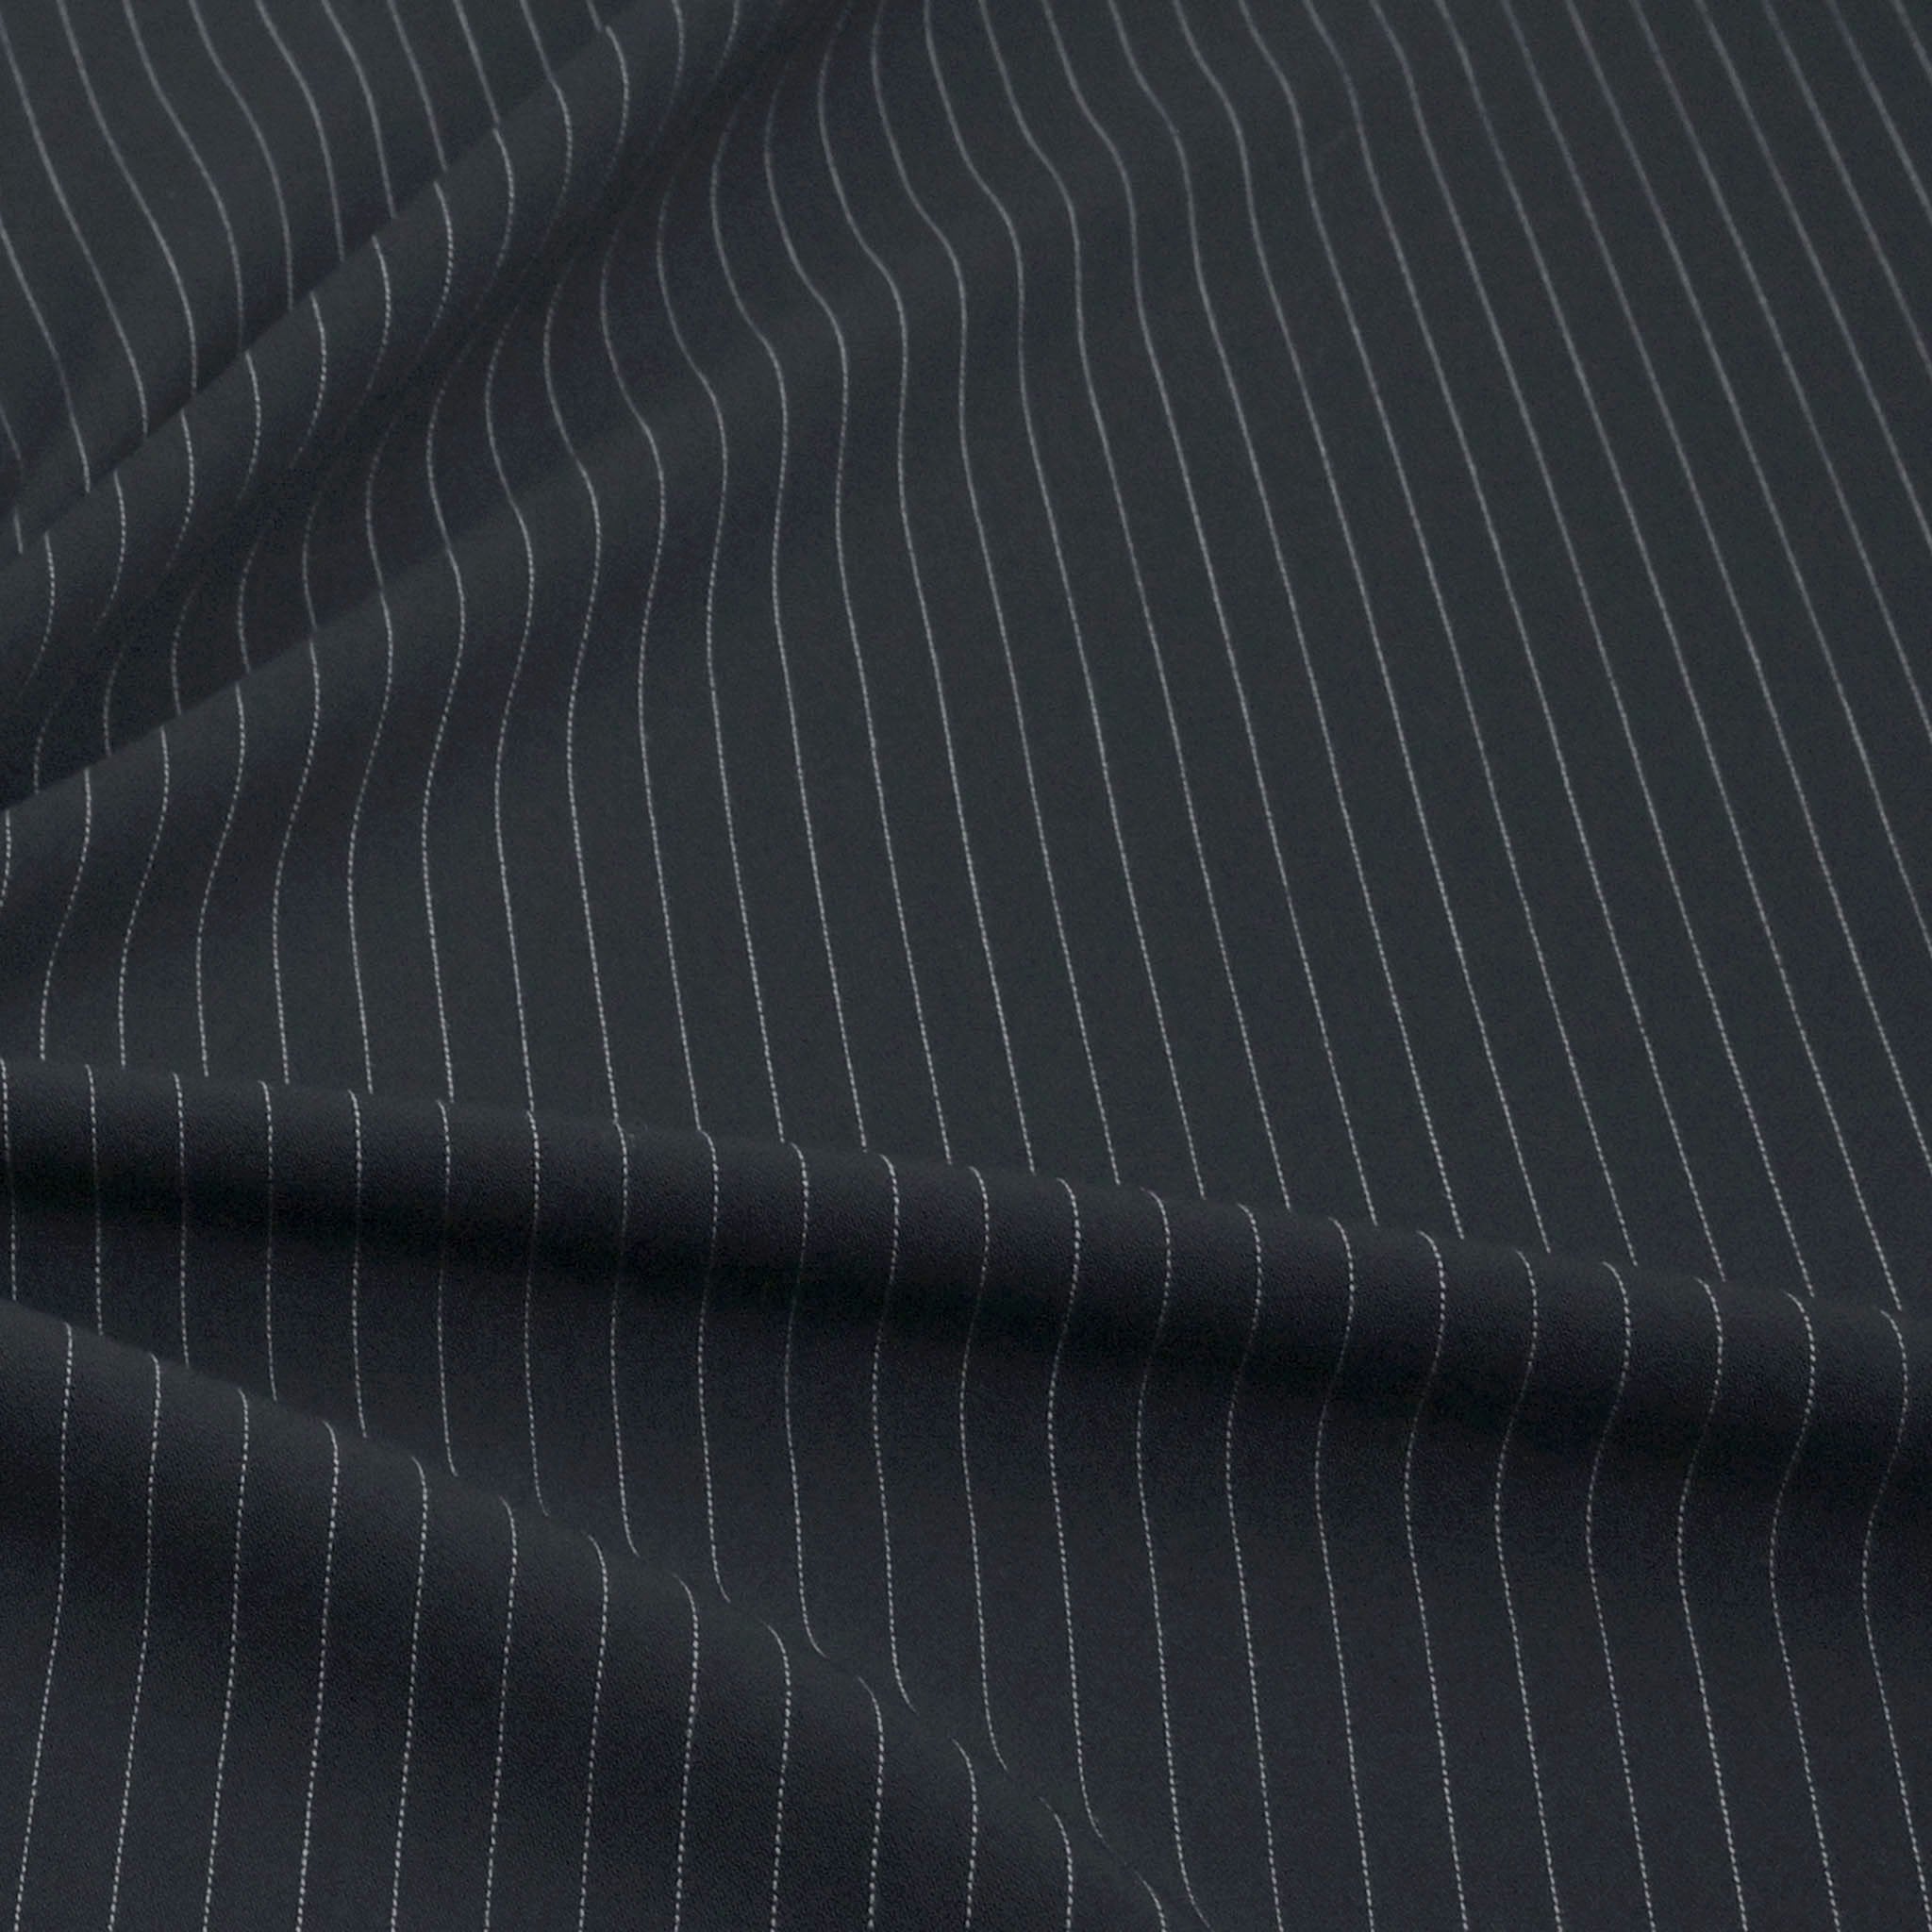 Navy Pinstripe Suiting Fabric 98641